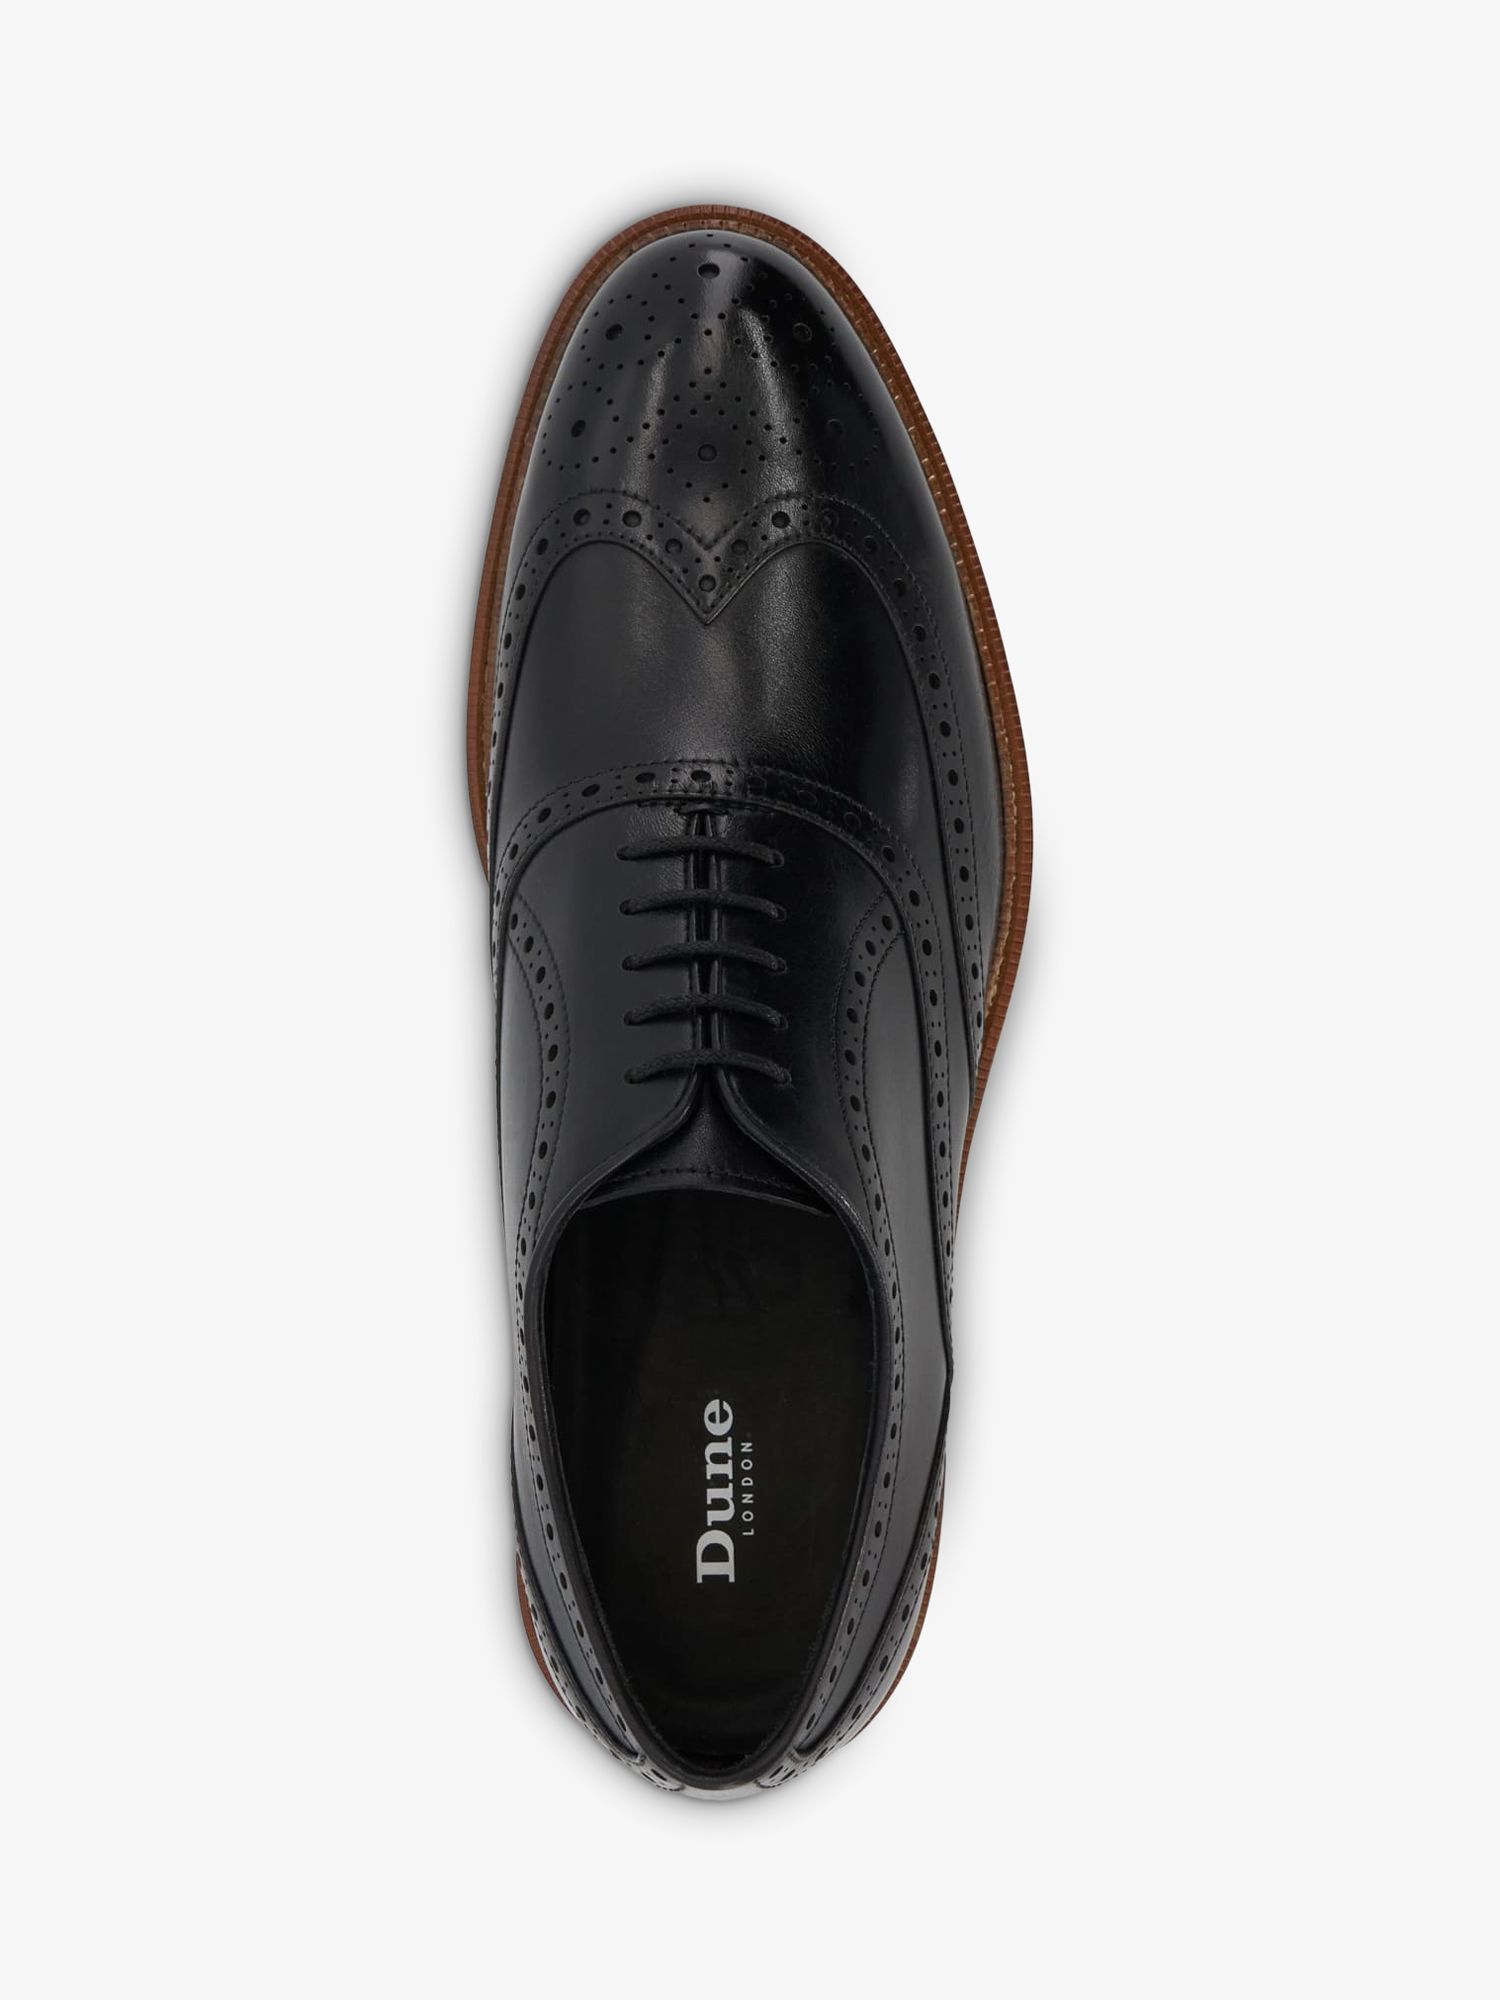 Buy Dune Solihull Brogue Leather Oxford Shoes Online at johnlewis.com